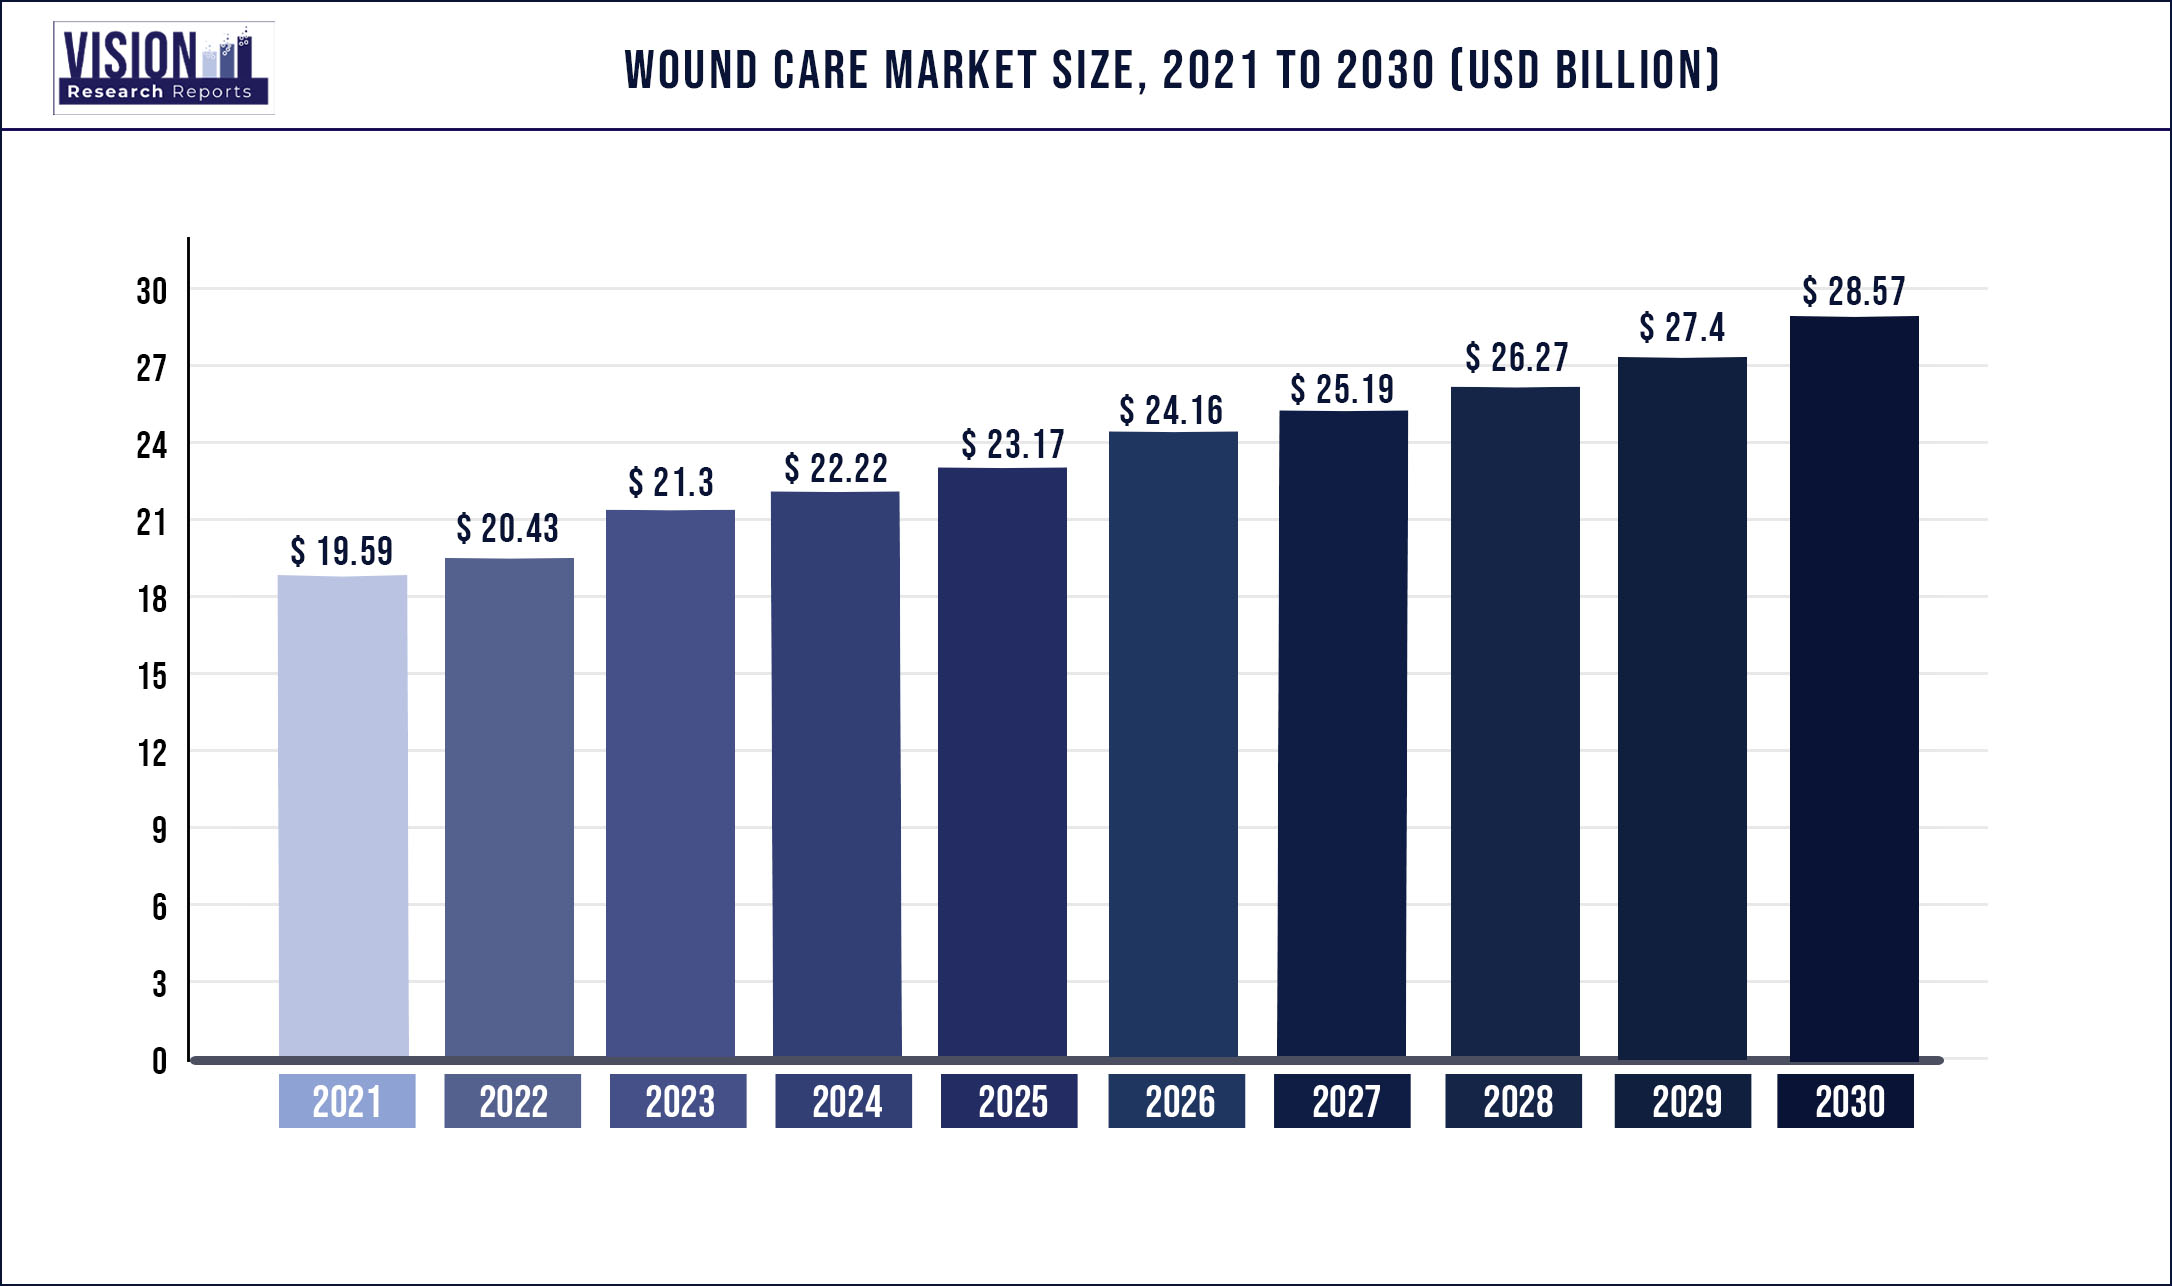 Wound Care Market Size 2021 to 2030